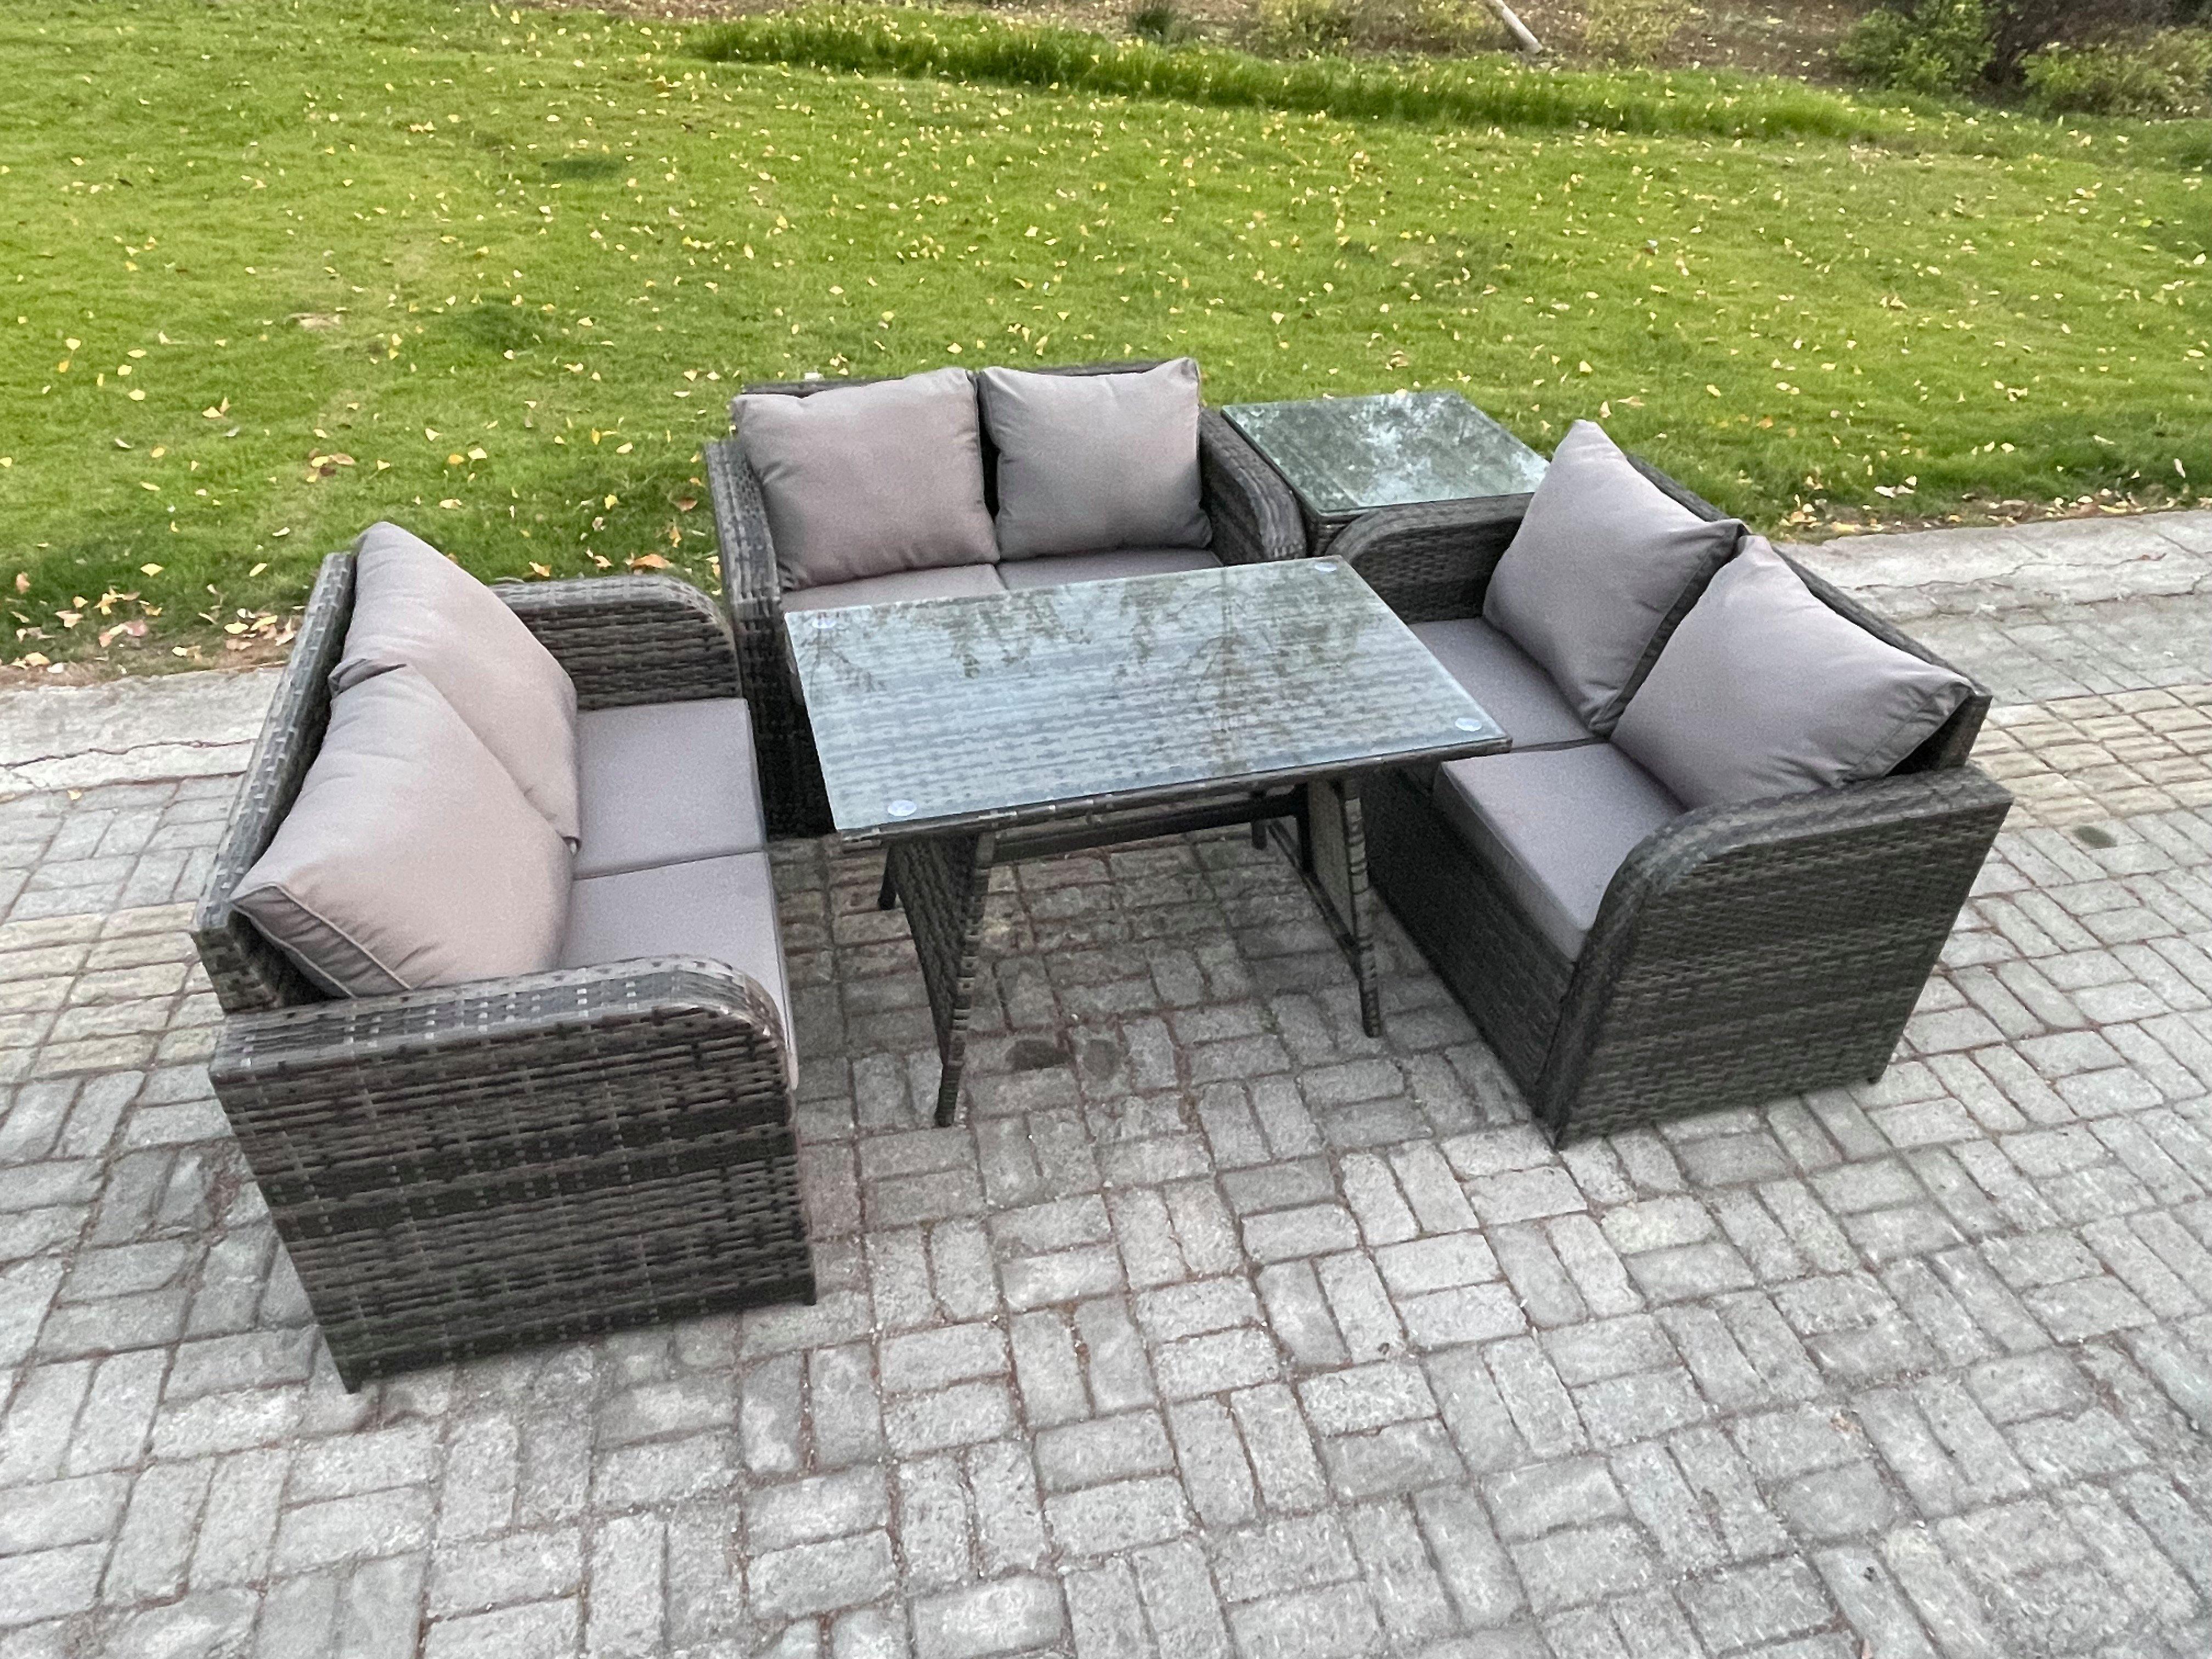 Rattan Garden Furniture Set 6 Seater Patio Outdoor Love Sofa Set with Rectangular Dining Table Side 